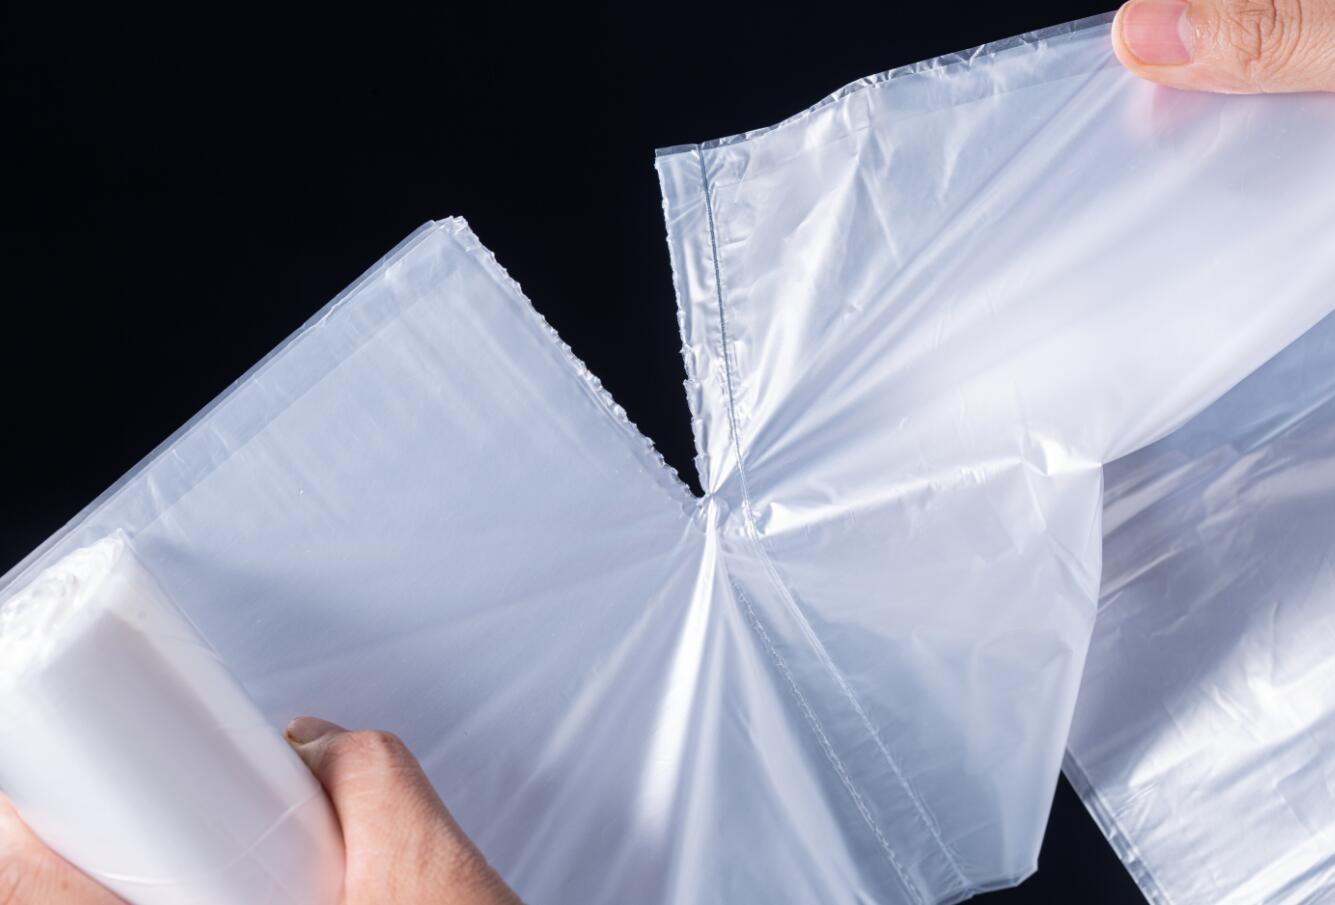 Disposable ice cube bag – China manufacturer for plastic bags,disposable  aprons, disposable gloves, garbage bags, bin linners shopping bags;  manufacturer in China